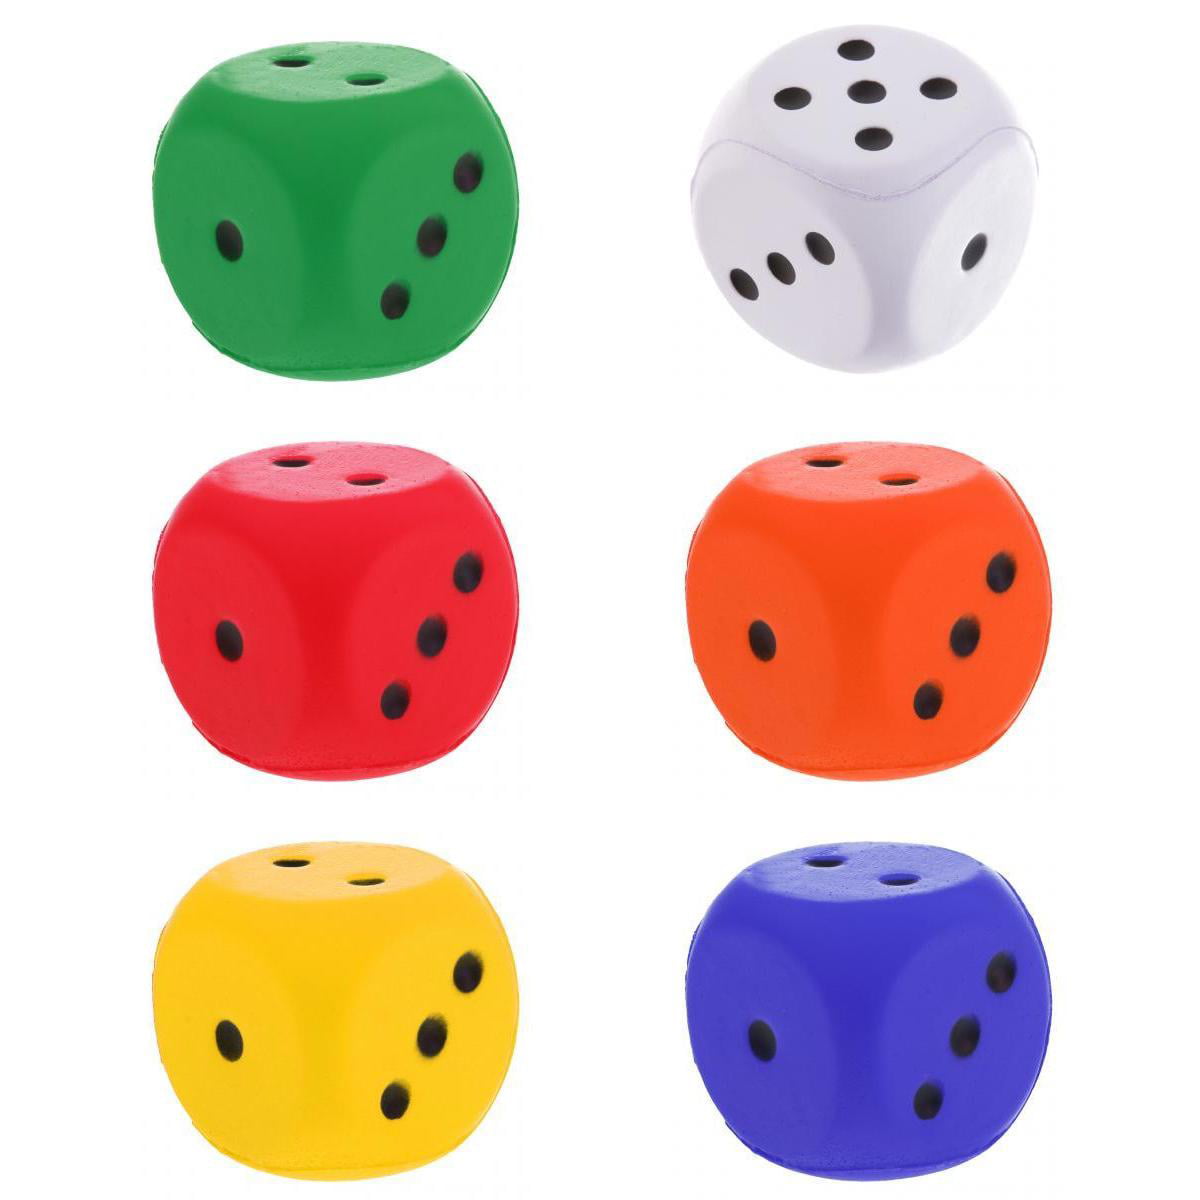 Details about   Sponge Dice Six Sided Game Toy Playing Dice Education Toy Orange 